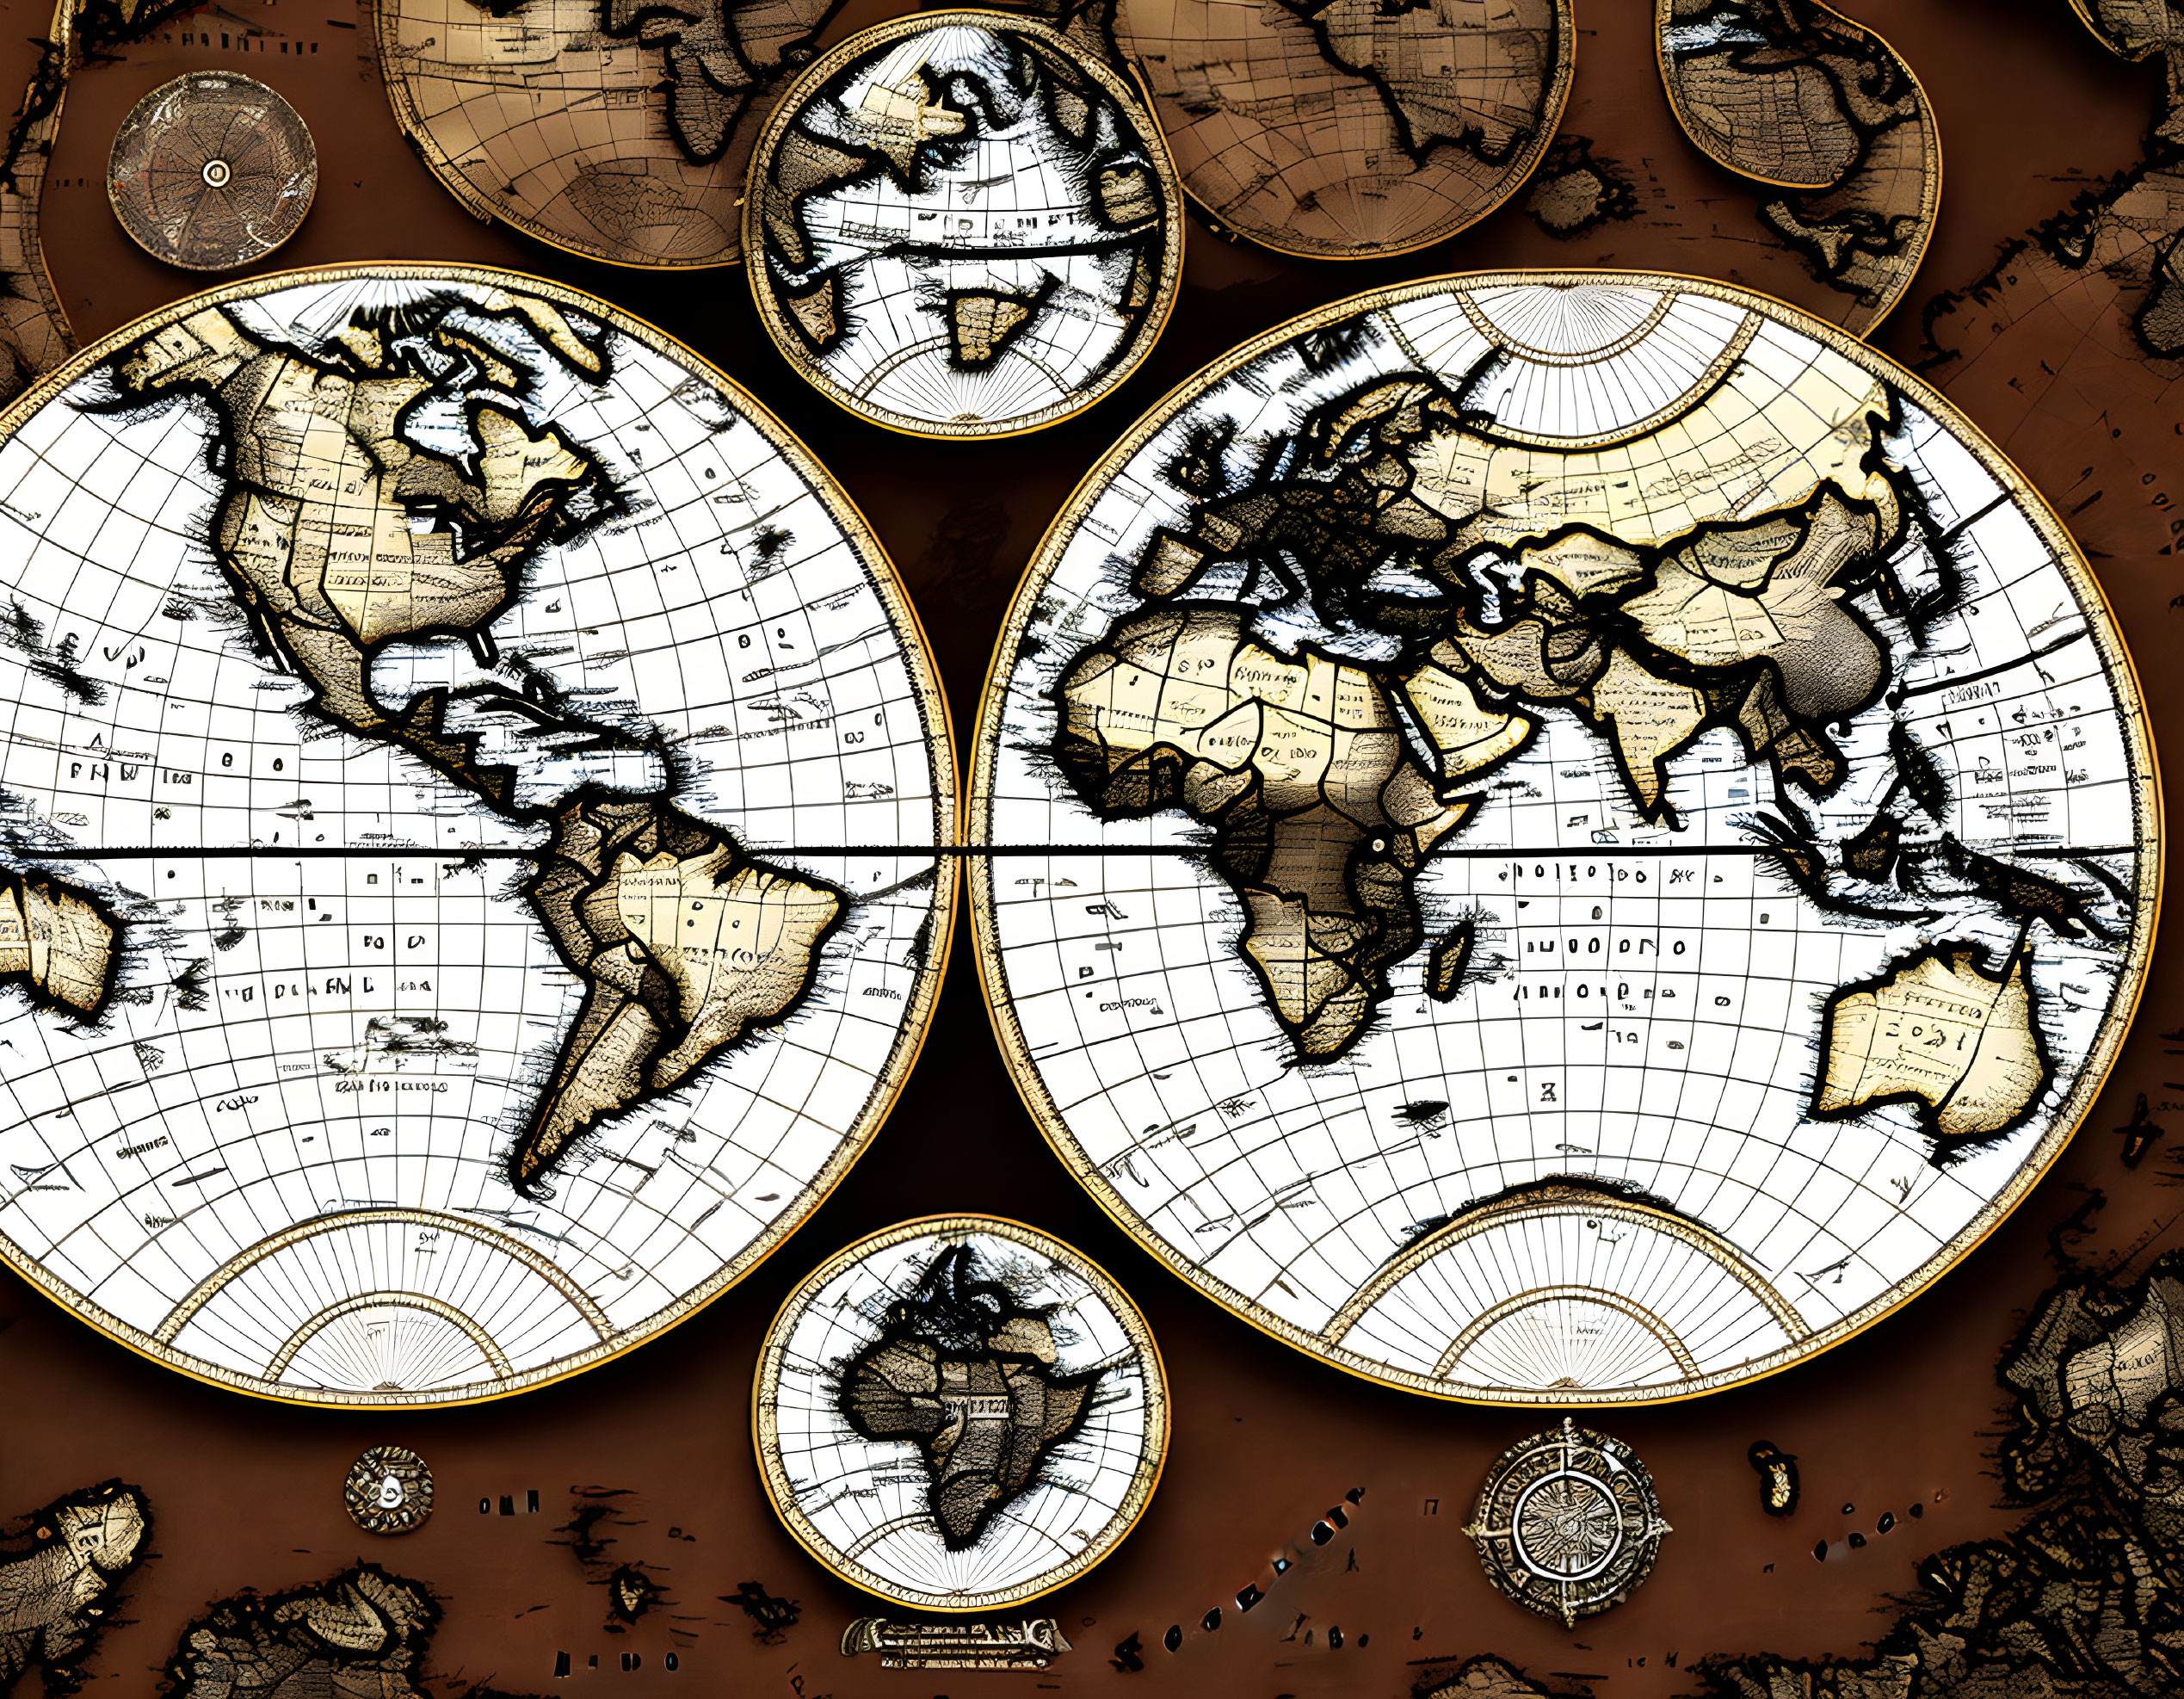 Vintage World Map Globes on Aged Background with Compasses and Nautical Items